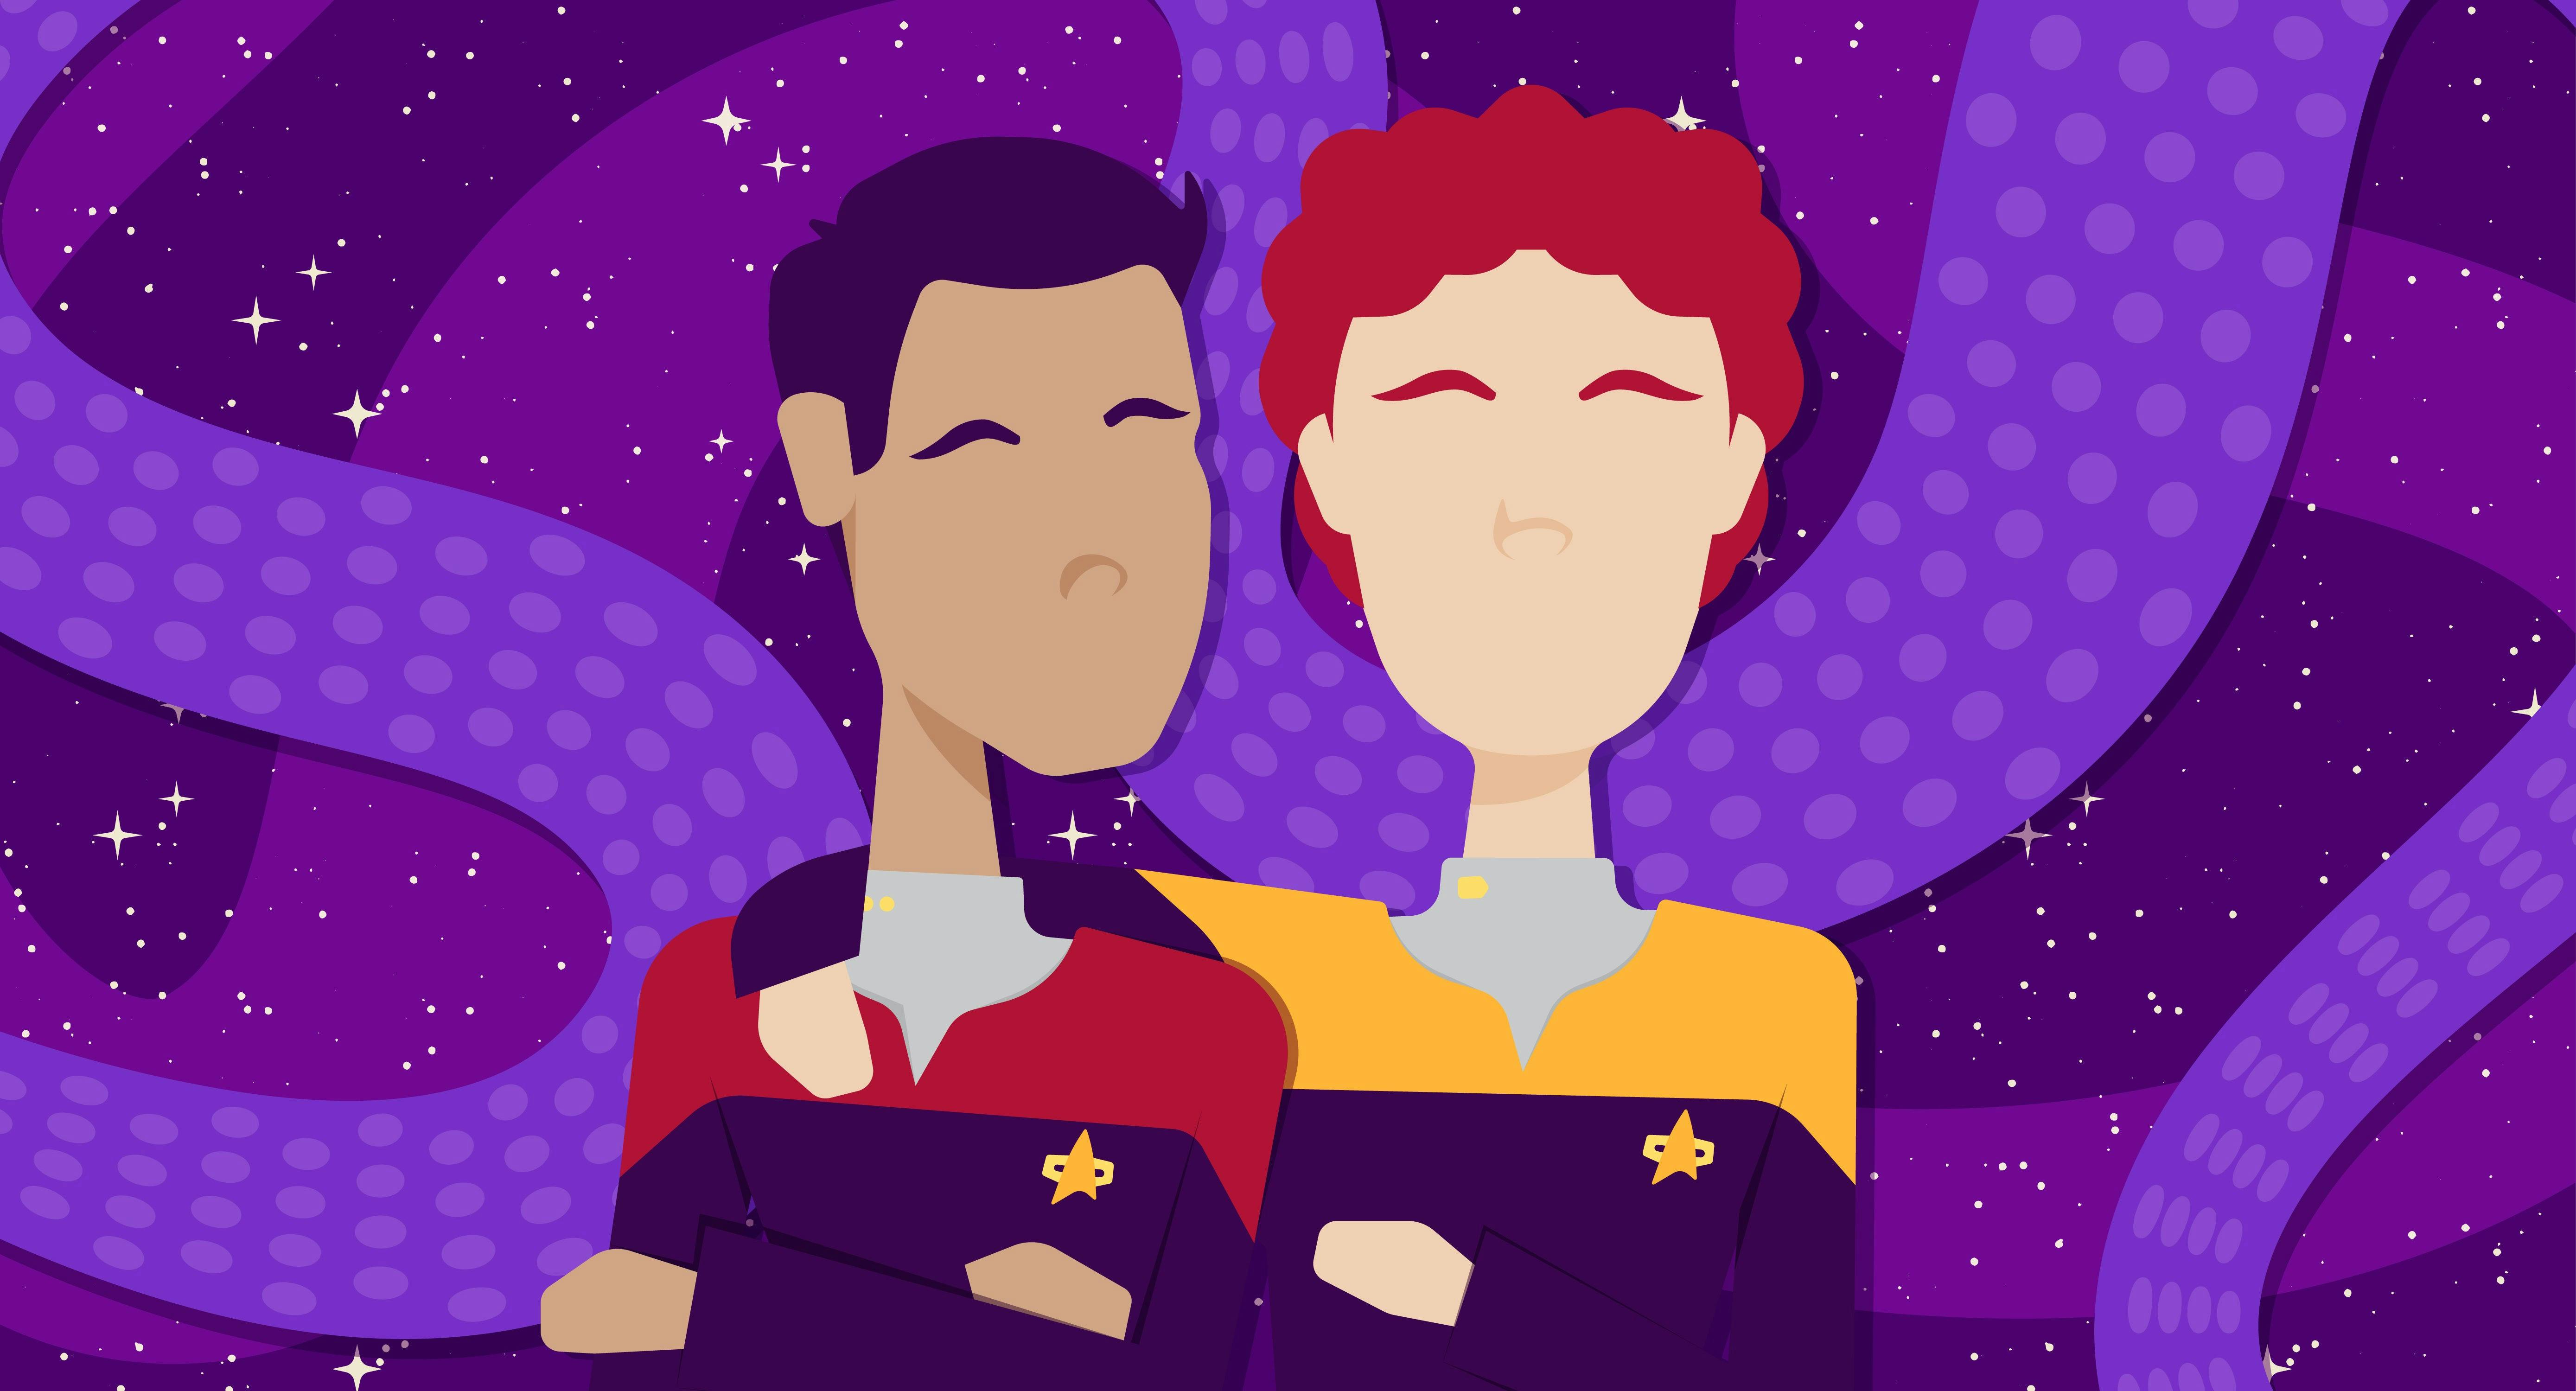 Illustrated art featuring Julian Bashir with Miles O'Brien's arm around his shoulder